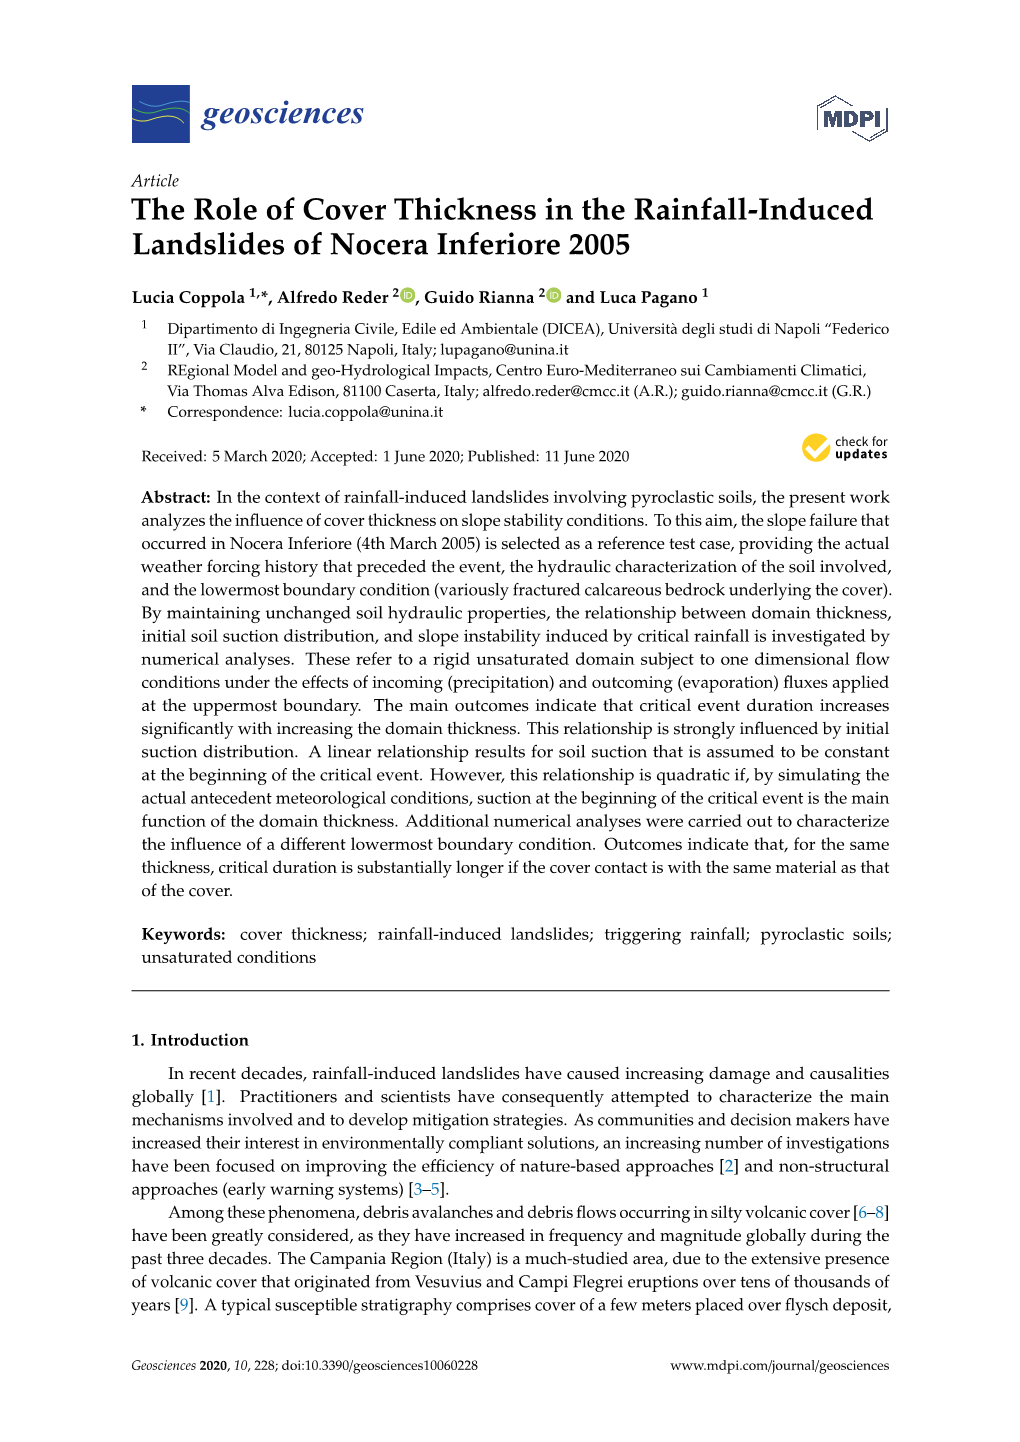 The Role of Cover Thickness in the Rainfall-Induced Landslides of Nocera Inferiore 2005